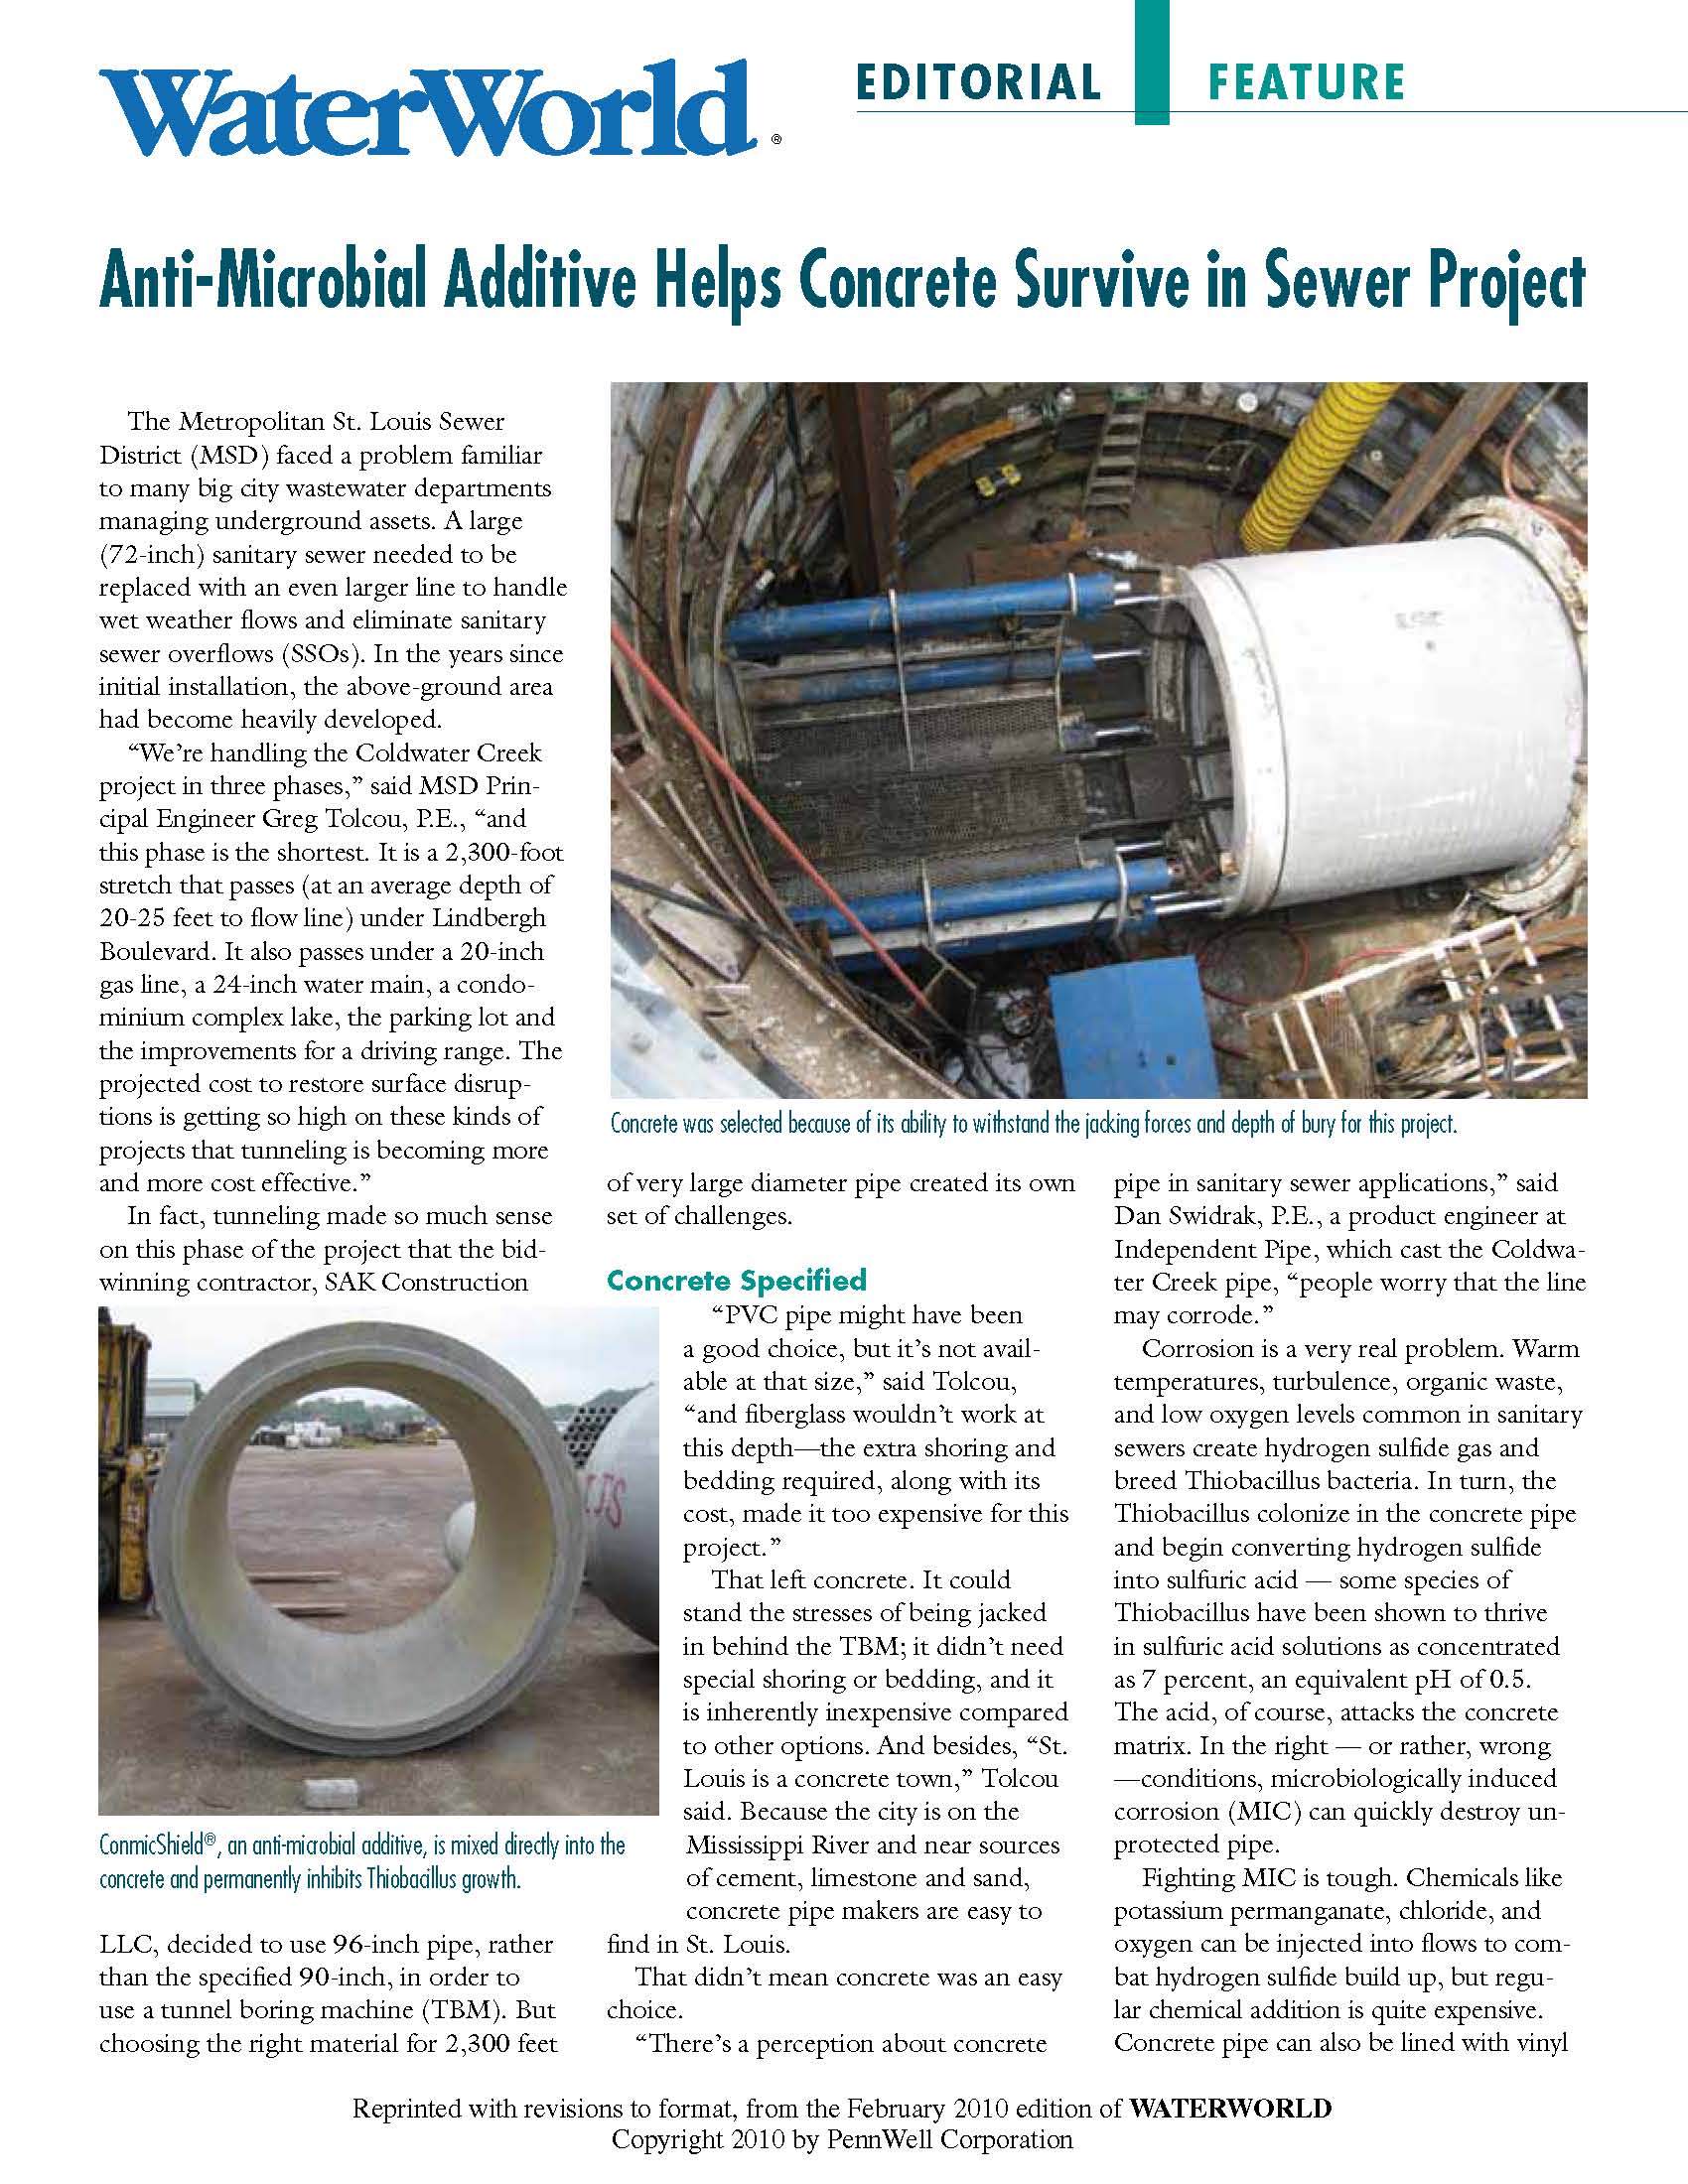 Protecting concrete sewer with anti-microbial additive